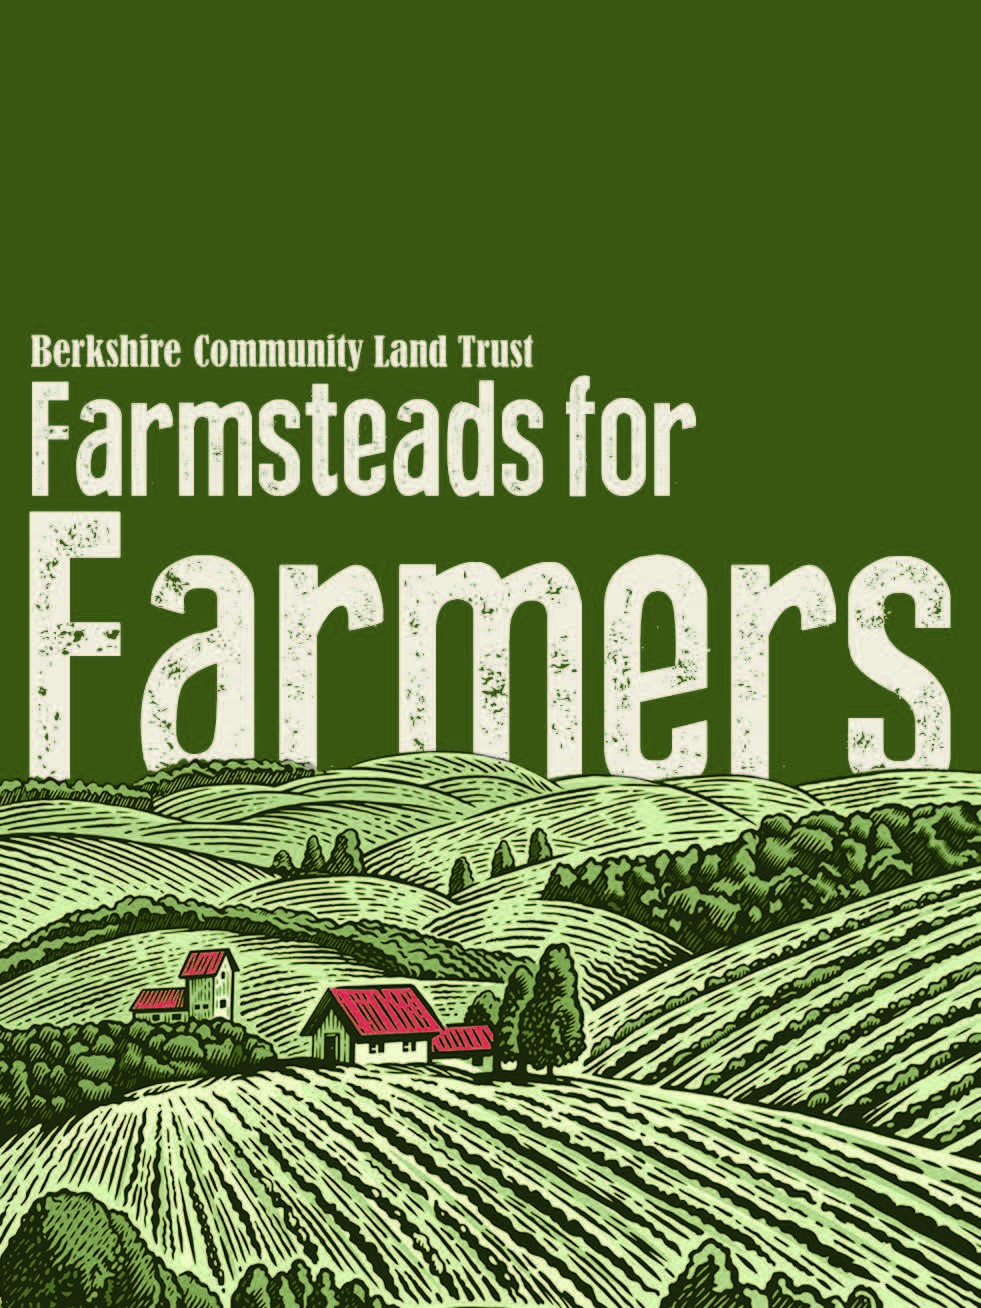 Learn about our Farmsteads for Farmers campaign